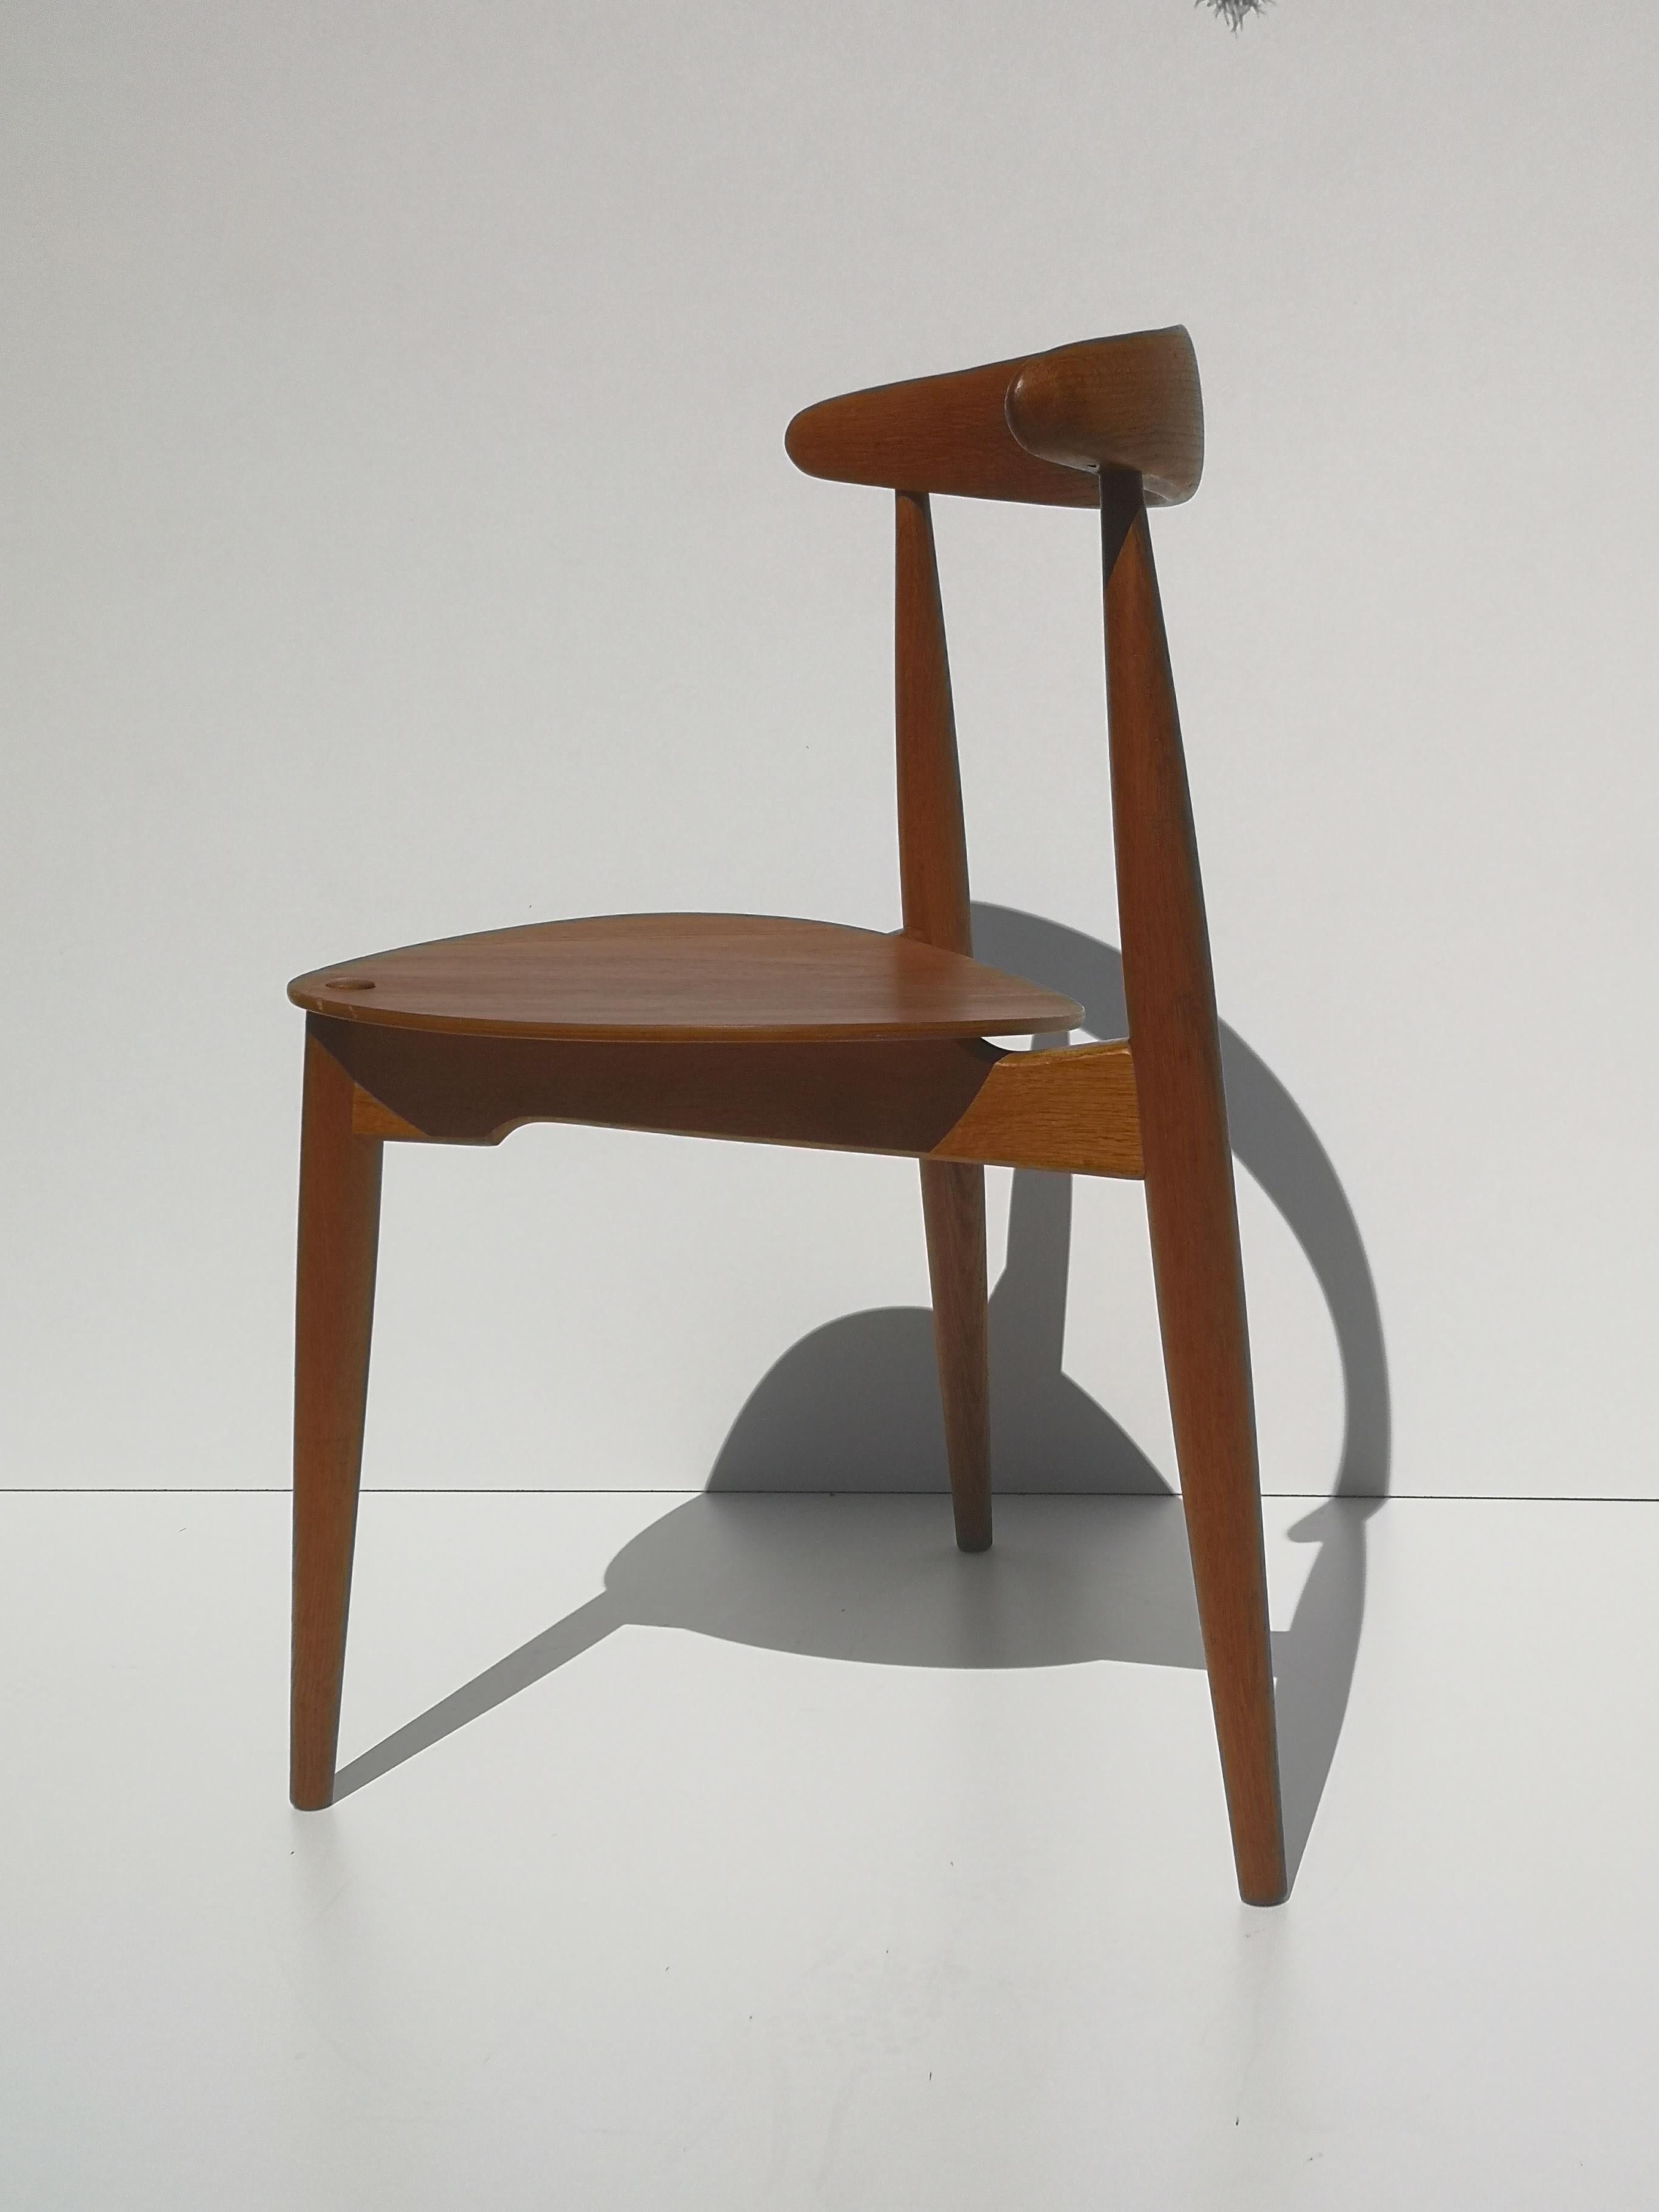 *Please note: We have four of these chairs available.

Hans Wegner's 